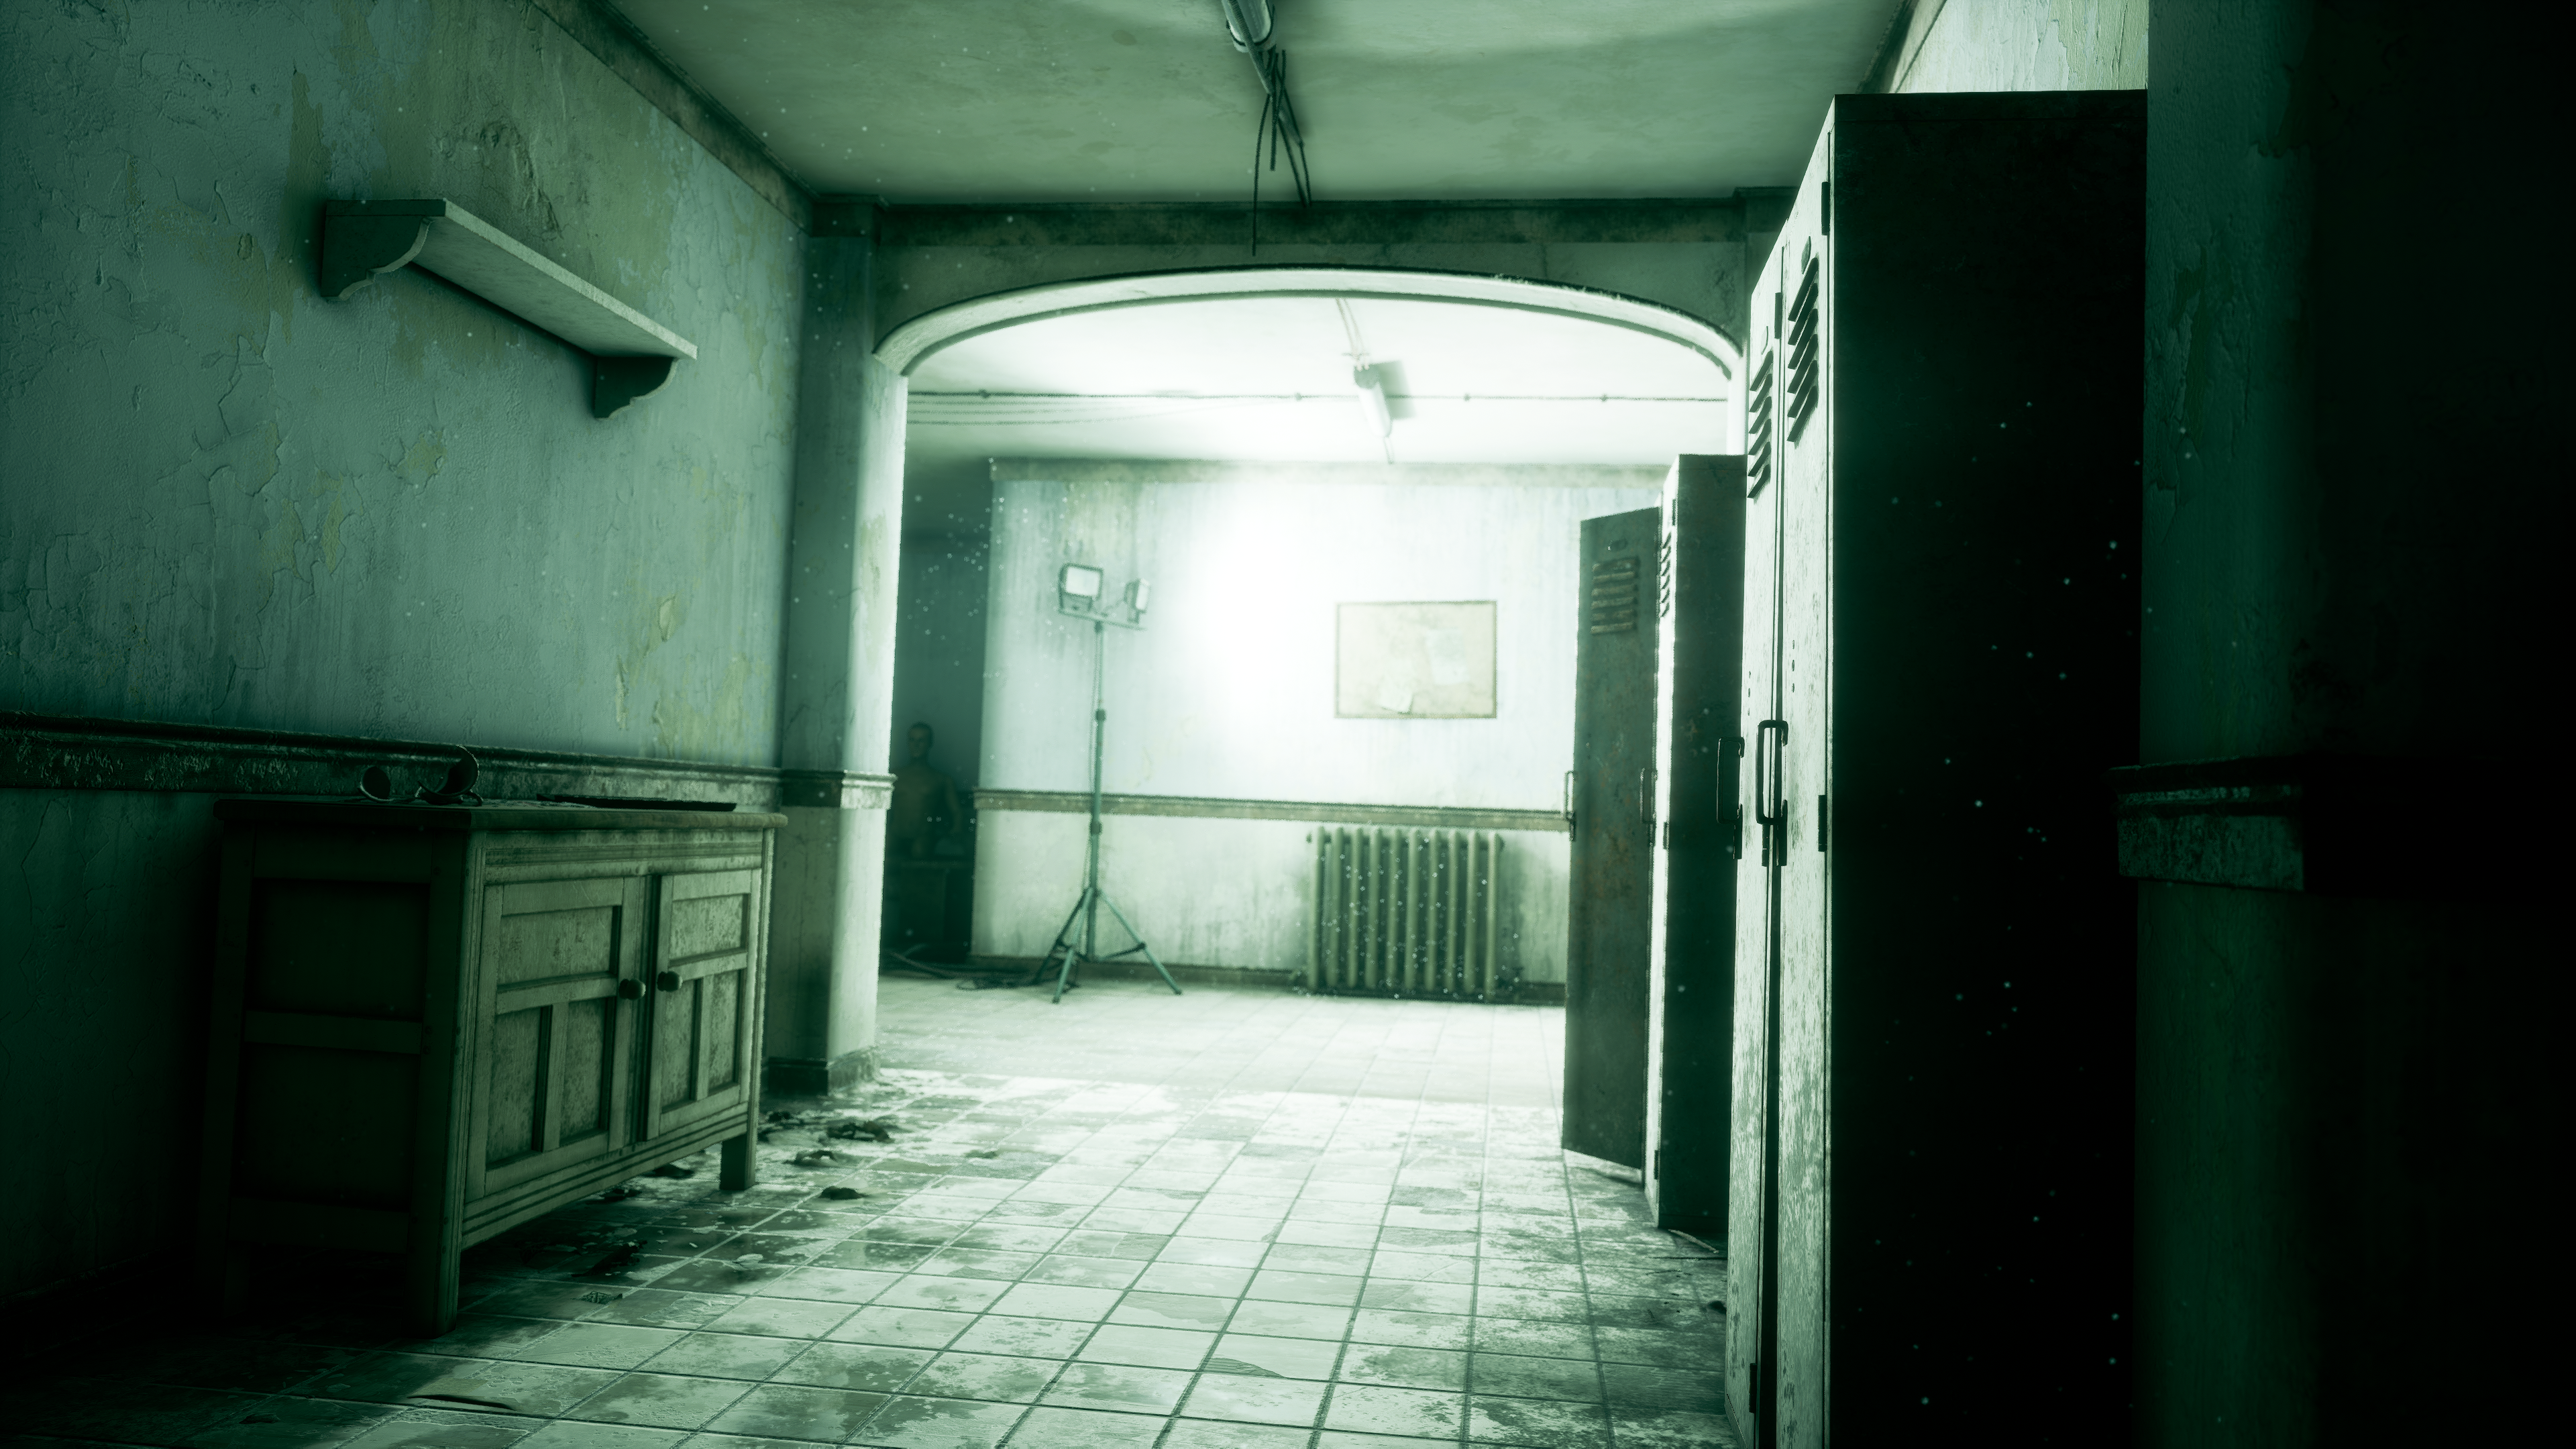 A gloomy hallway in the hotel of The Devil in Me is shown